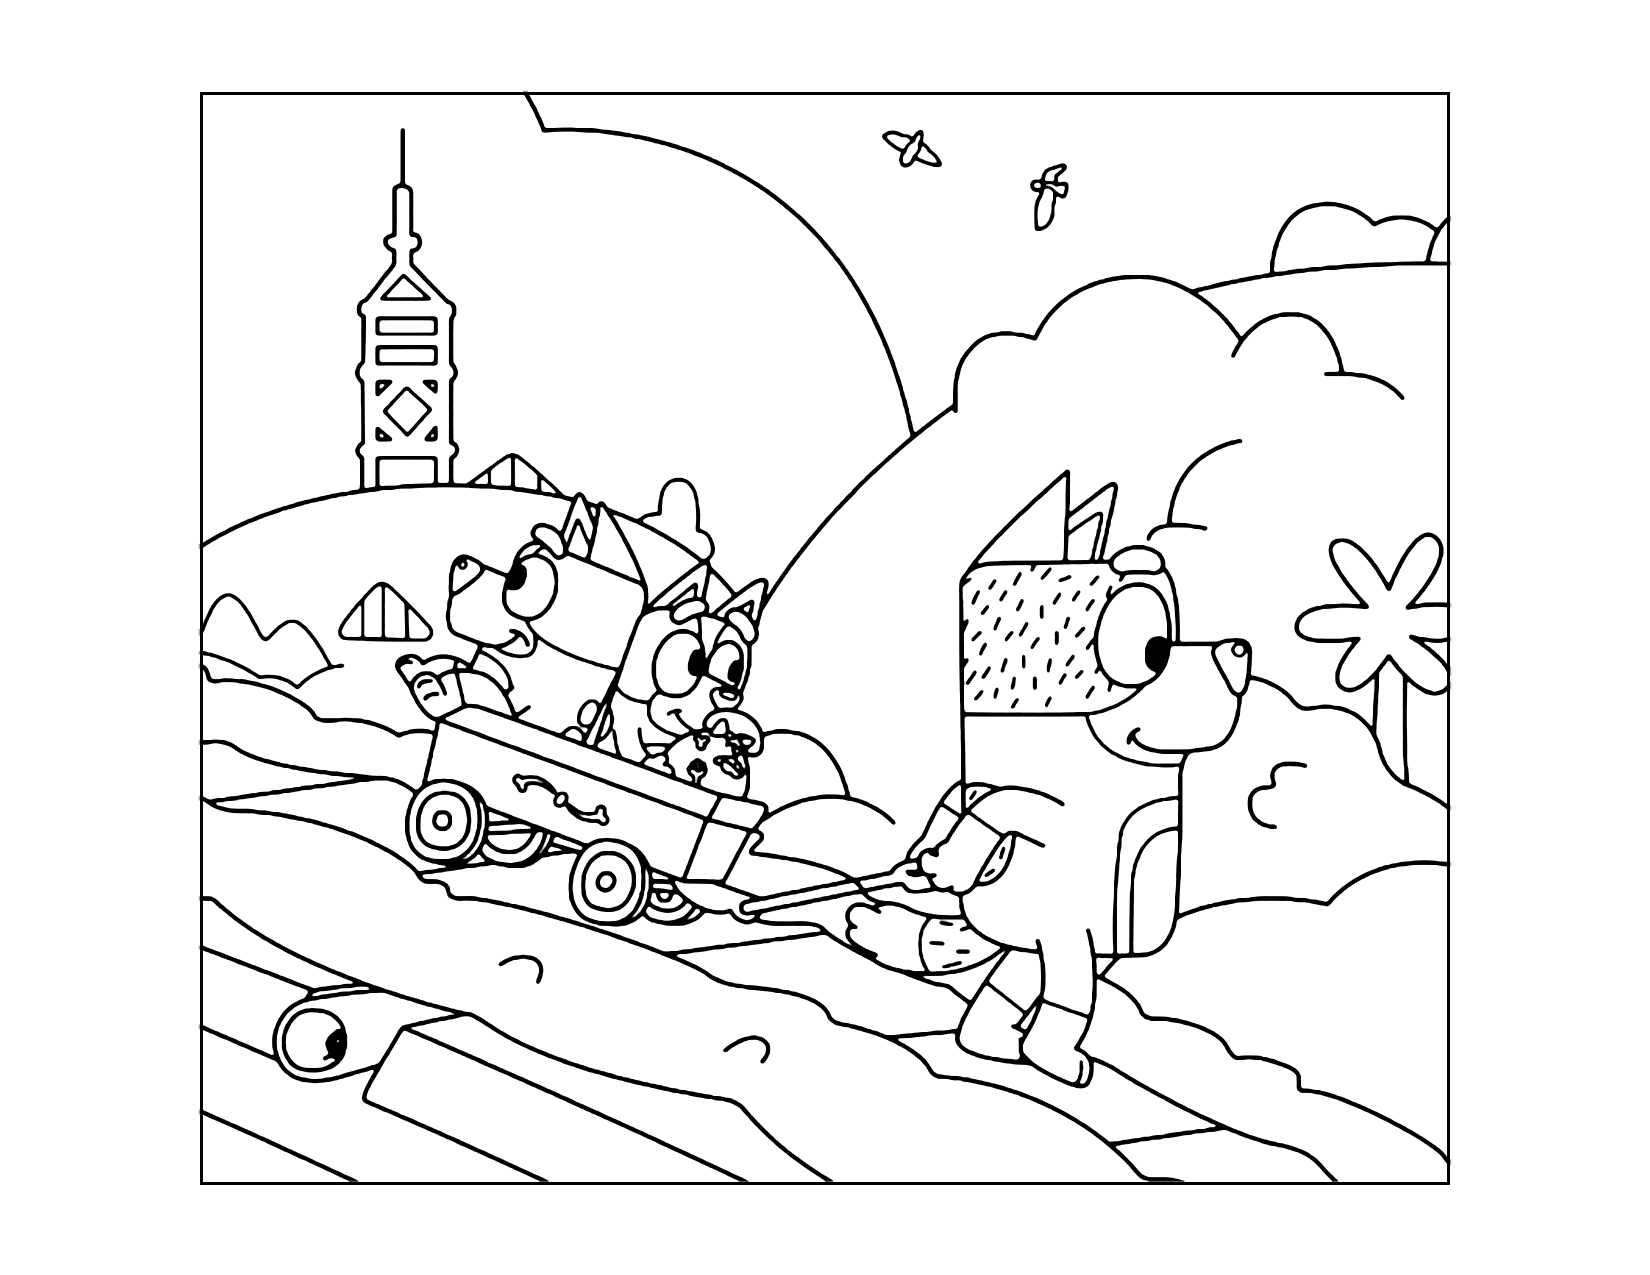 Bluey Coloring Page